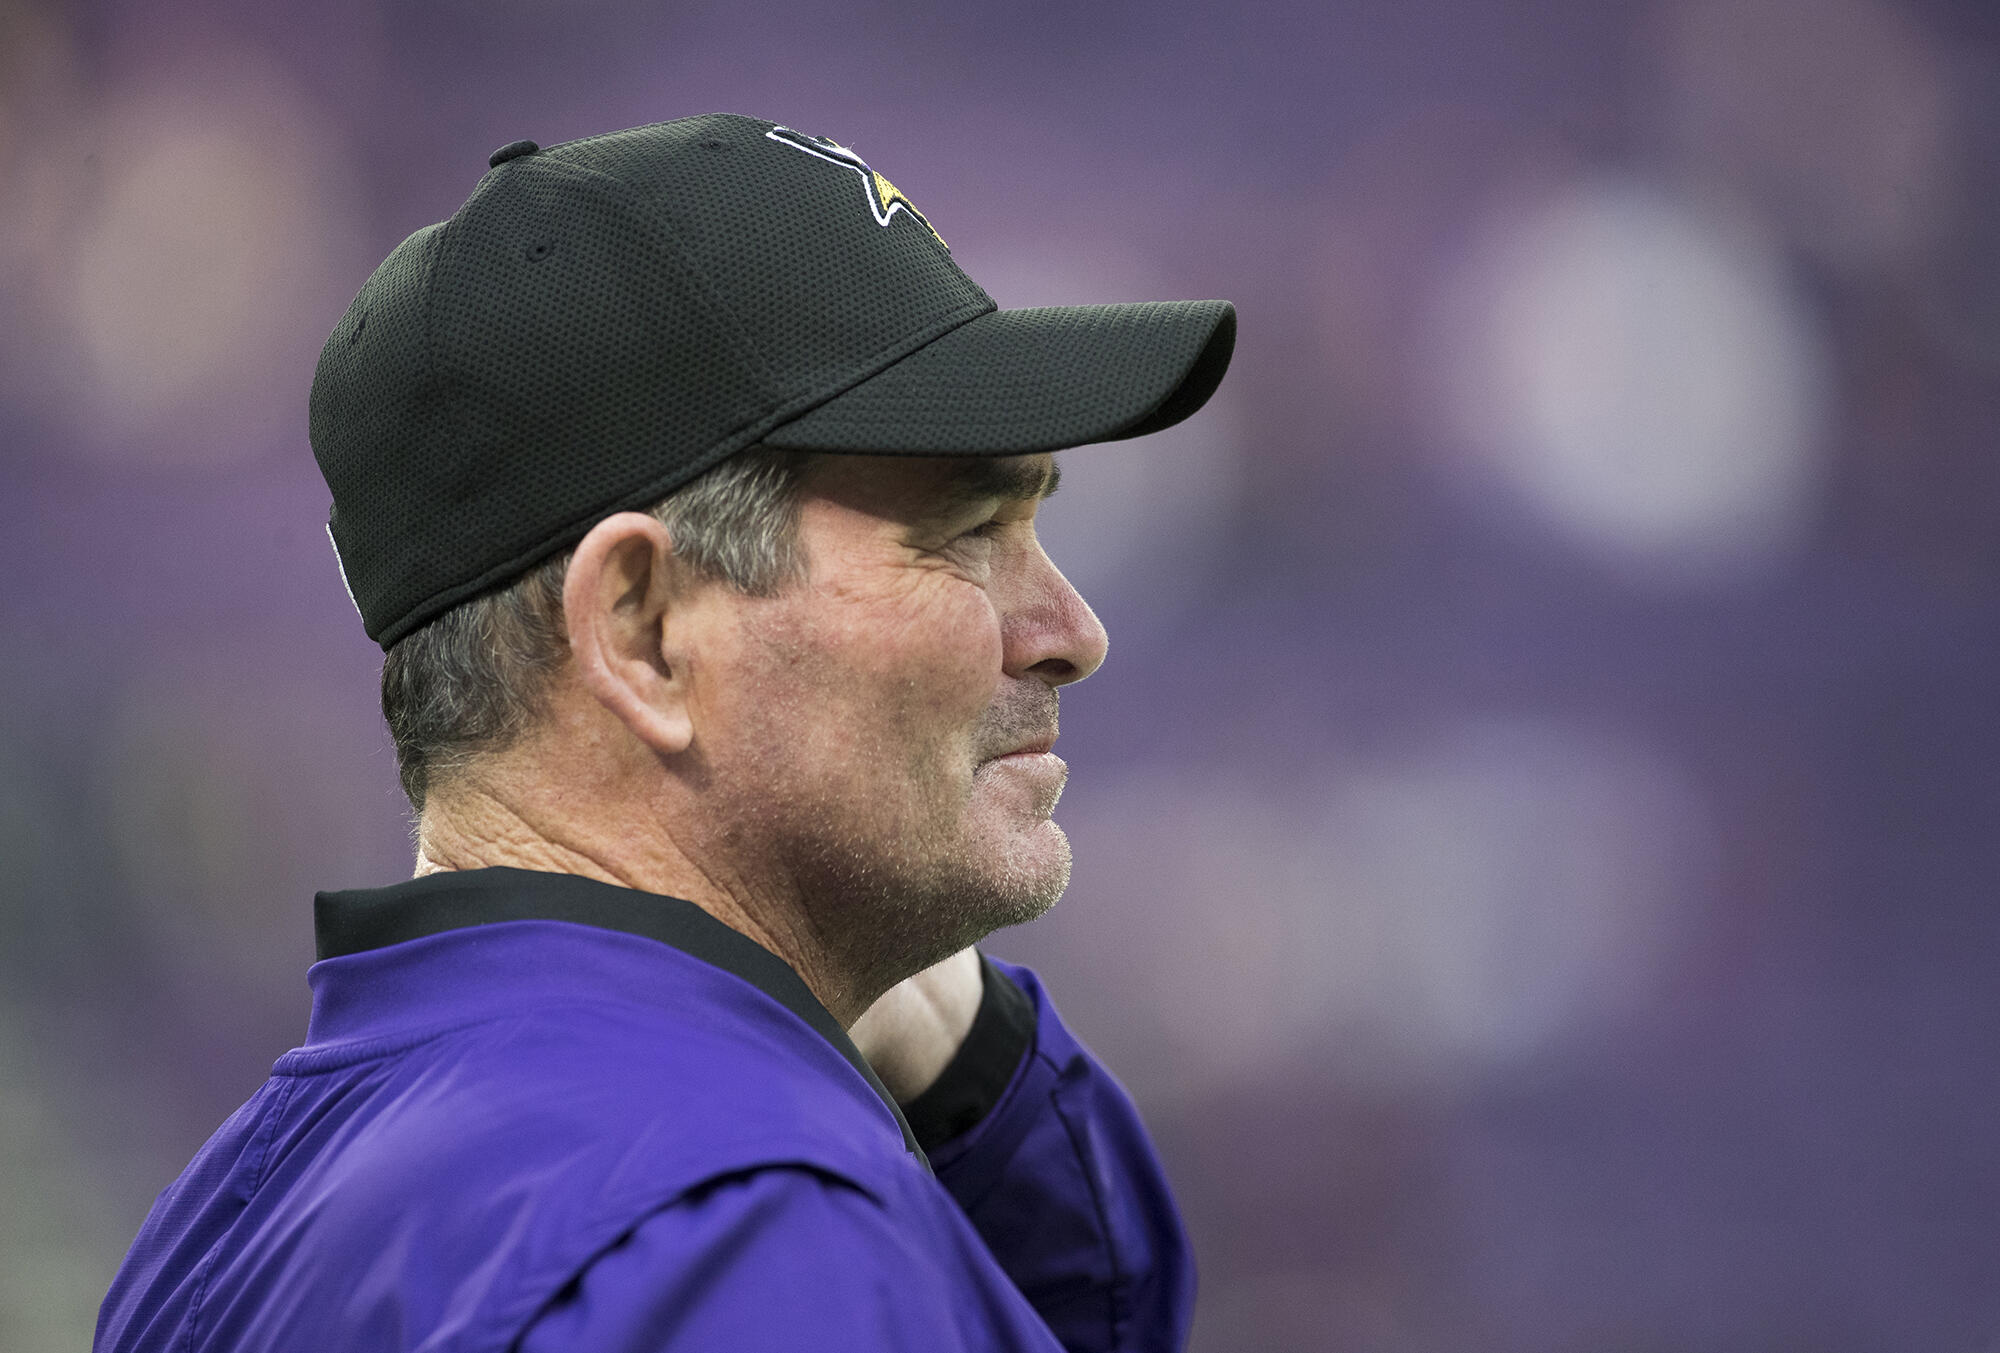 MINNEAPOLIS, MN - DECEMBER 18: Minnesota Vikings head coach Mike Zimmer before the game against the Indianapolis Colts on December 18, 2016 at US Bank Stadium in Minneapolis, Minnesota. (Photo by Adam Bettcher/Getty Images)